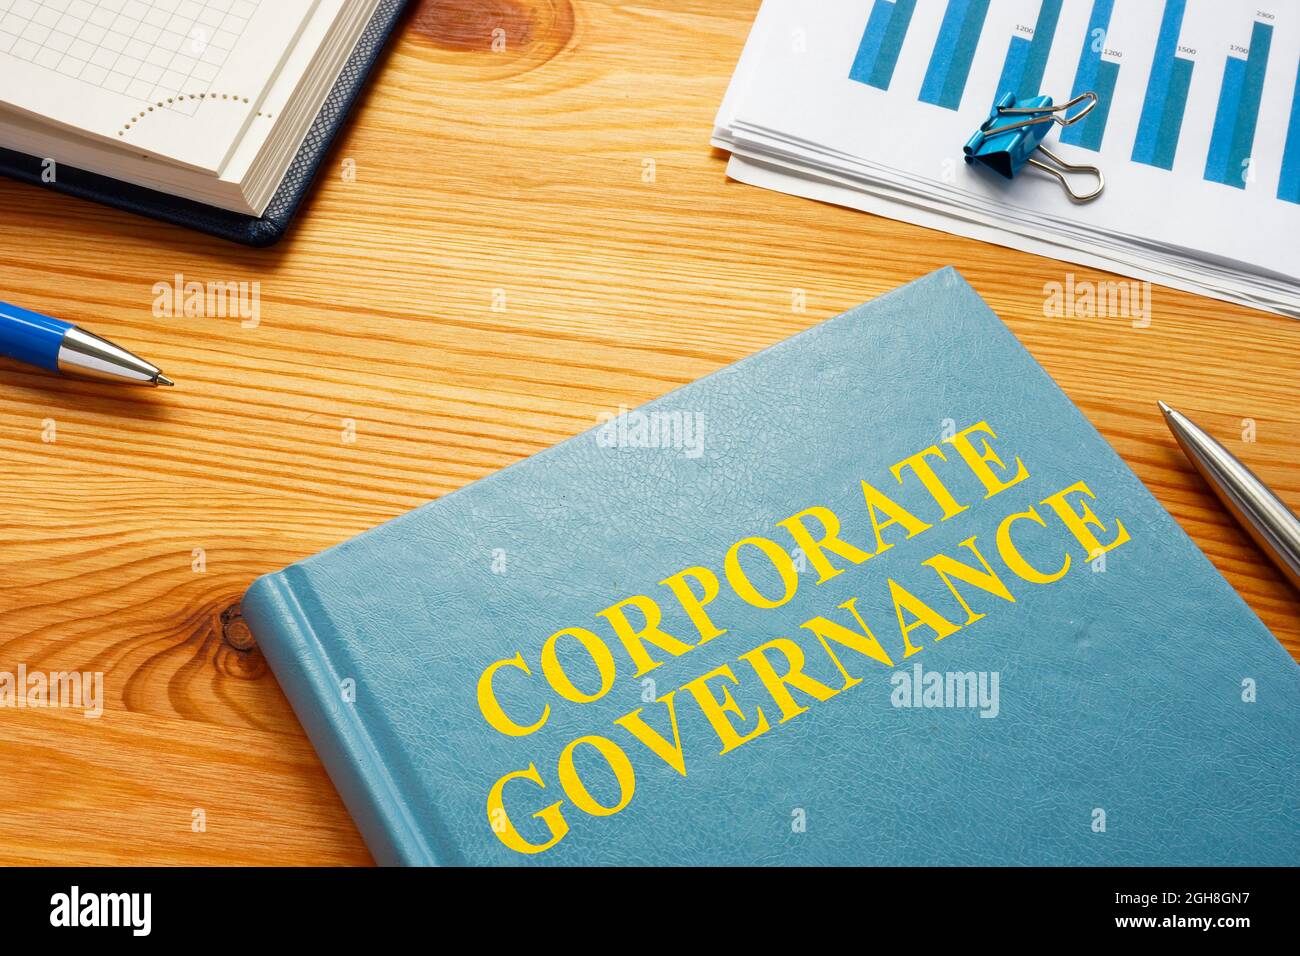 Corporate governance book with business report and charts. Stock Photo